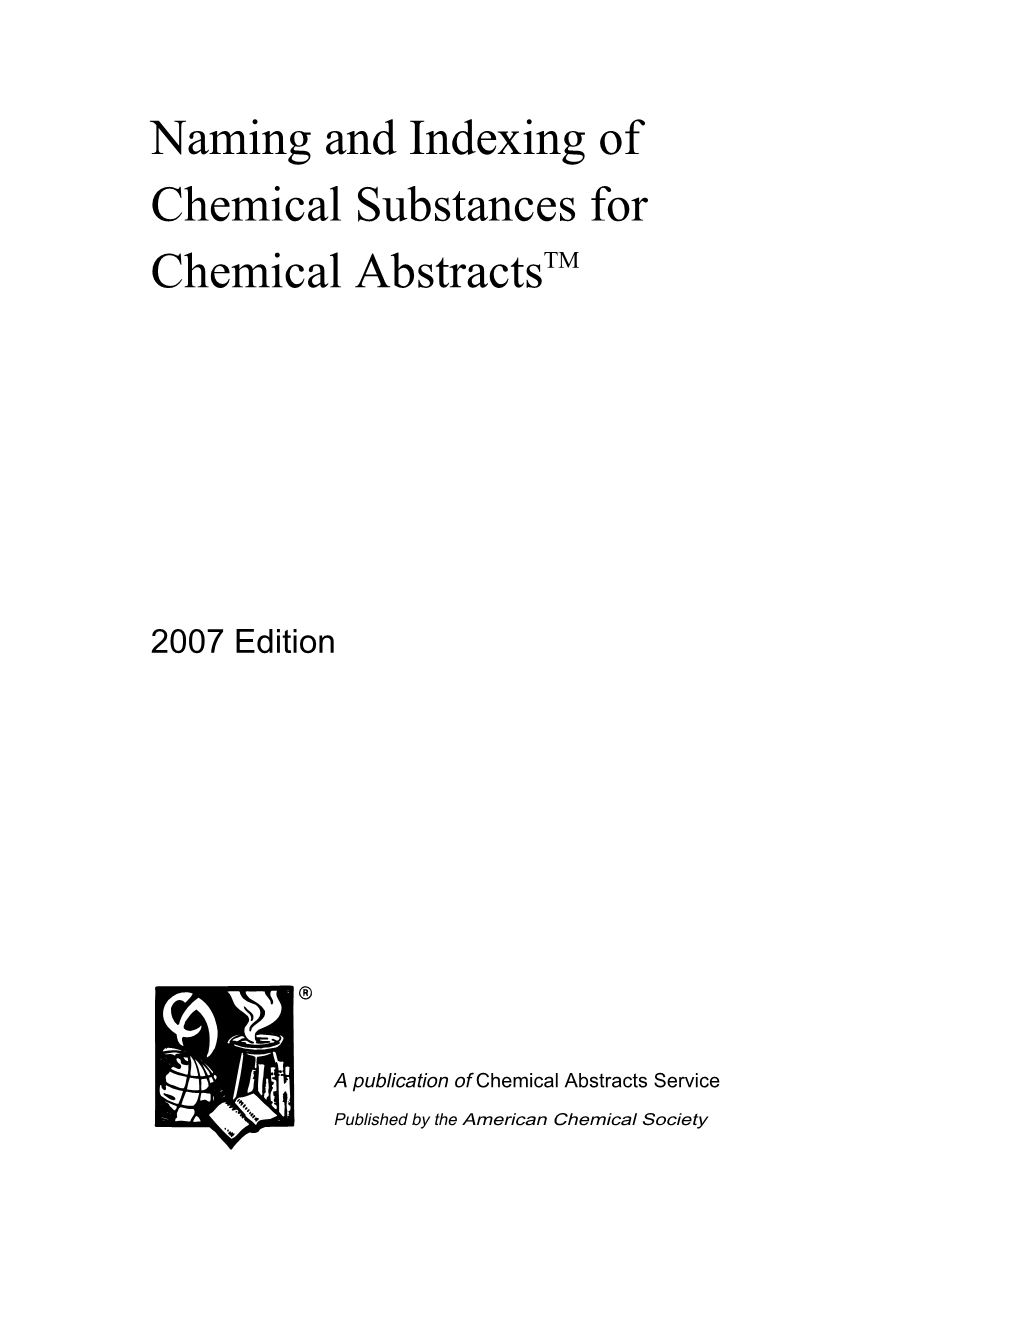 Naming and Indexing of Chemical Substances for Chemical Abstractstm